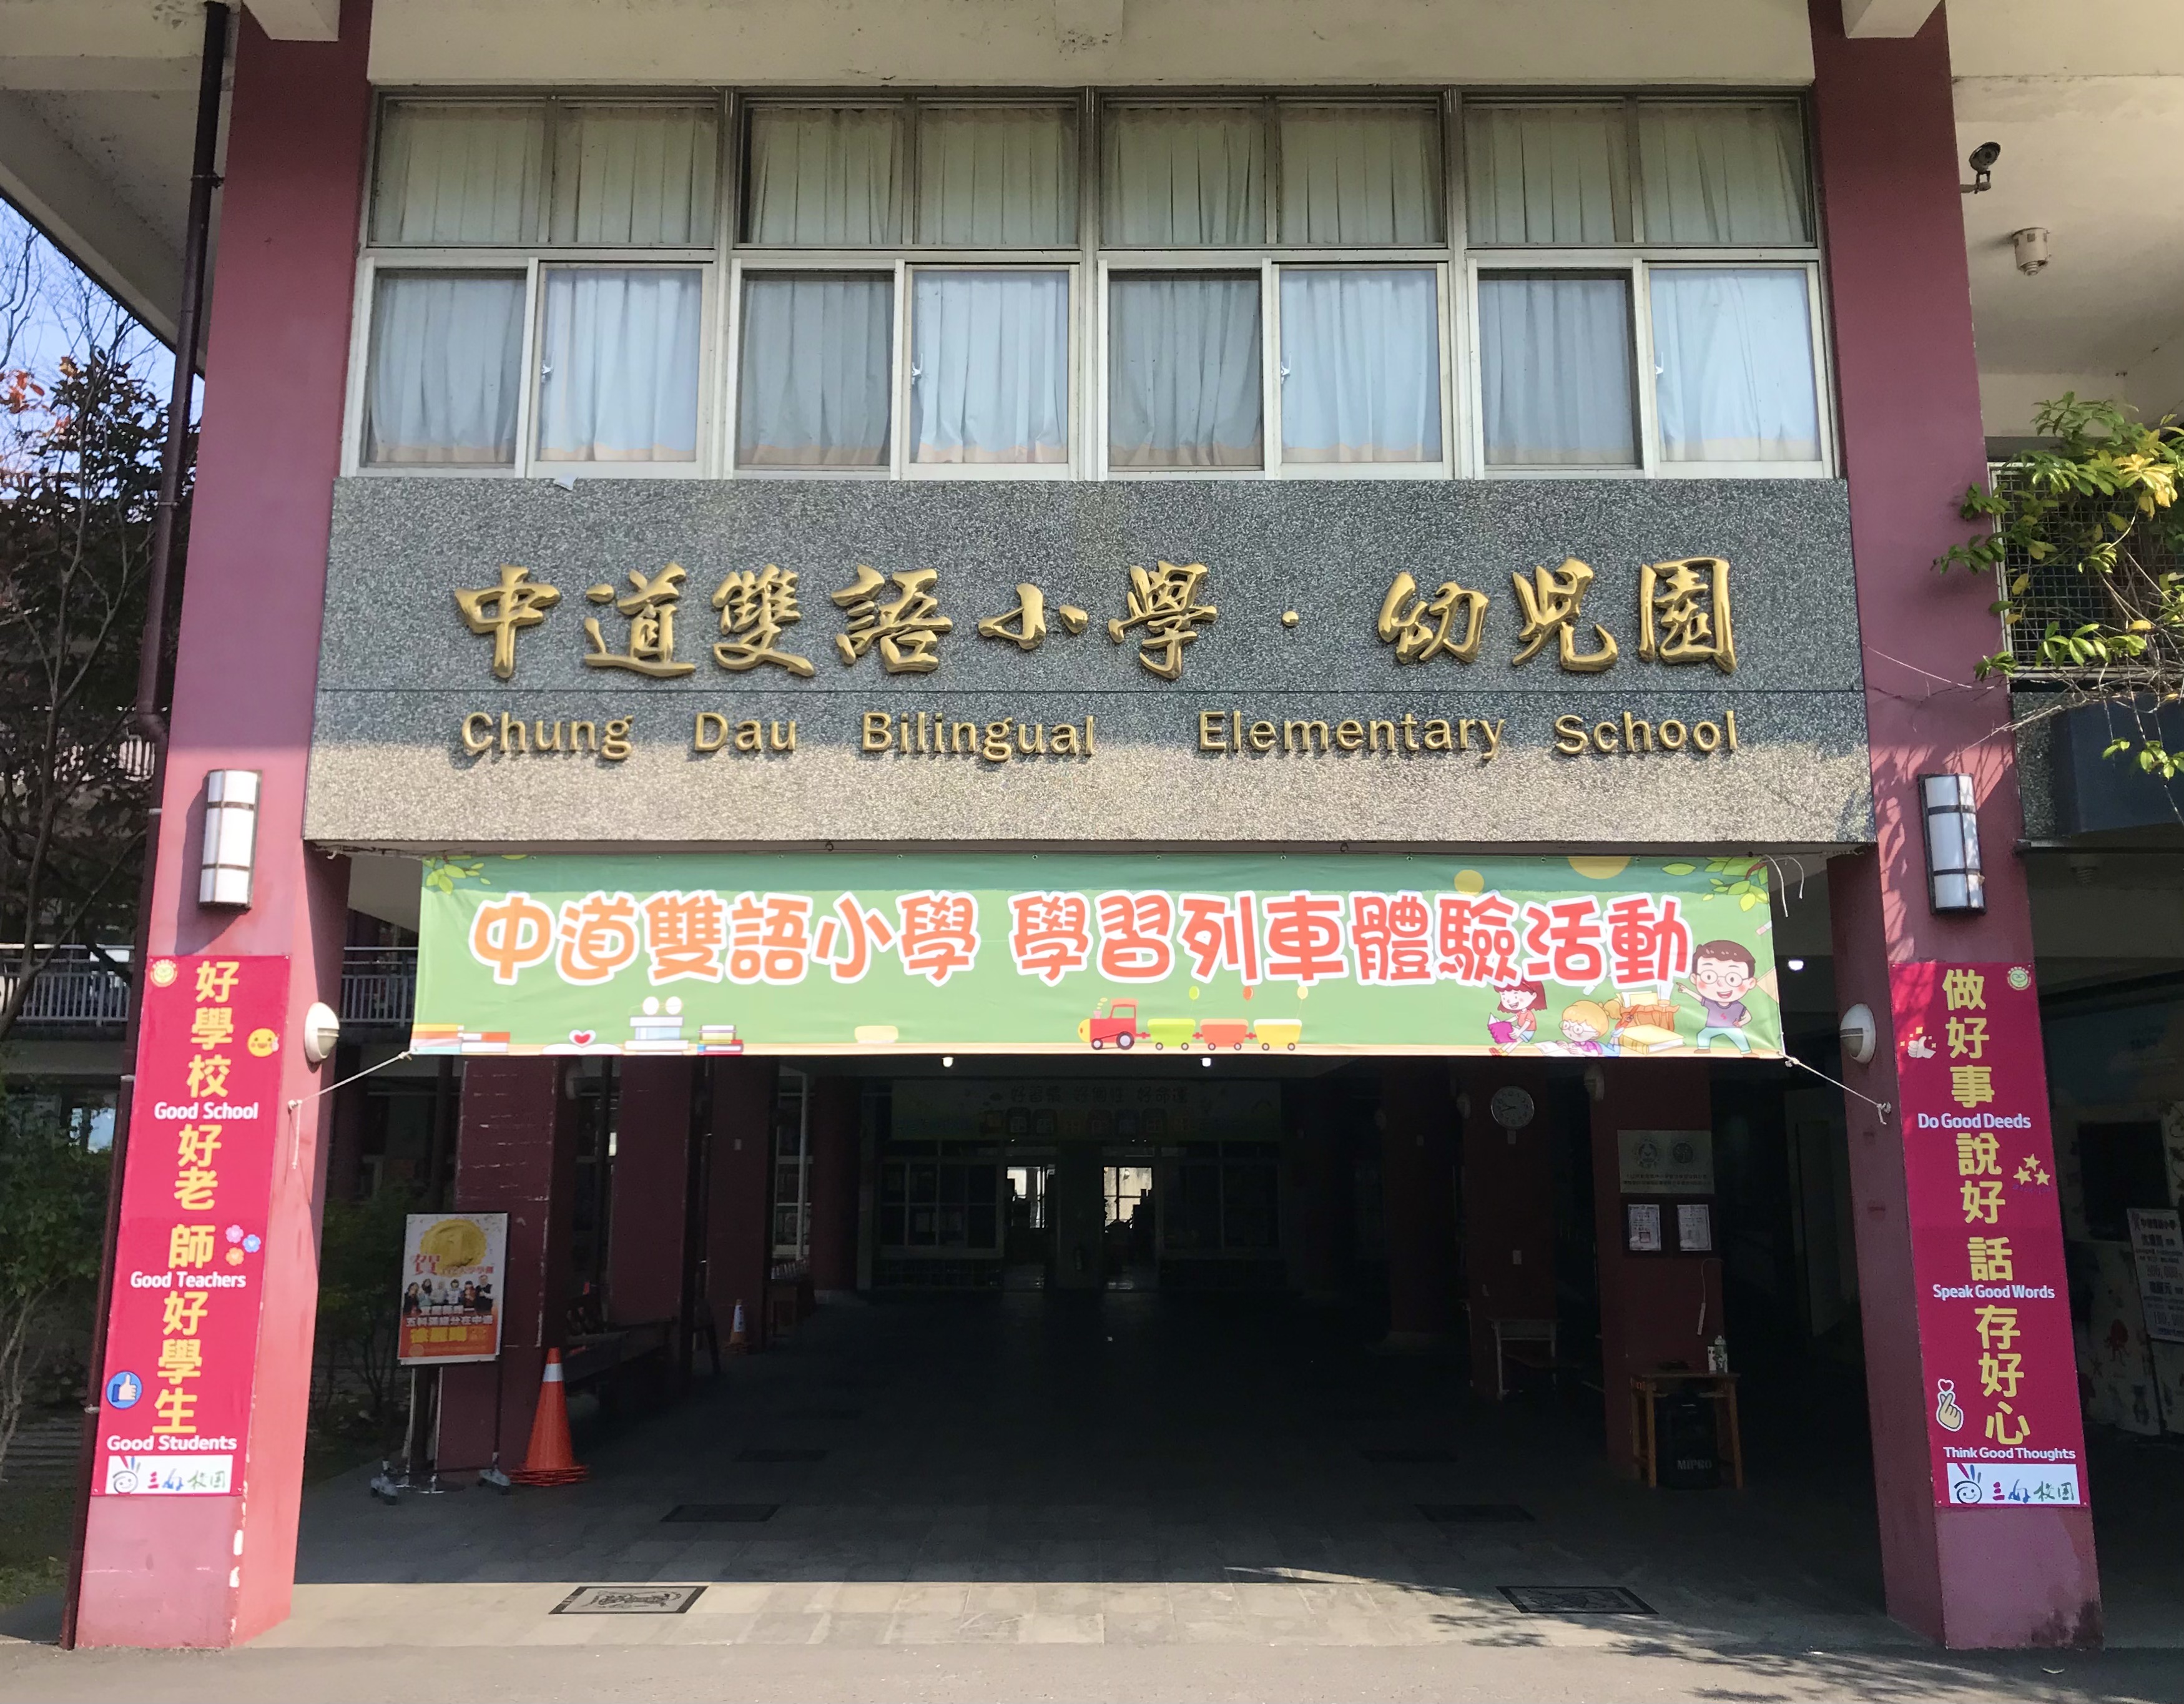 Teaching English and Living in Taiwan, FULL-Time Position for APRC 台灣永久居留證 Holder or State-Licensed Teacher 所在政府頒發的教學許可證 in BEAUTIFUL YILAN!  Minutes from the Ocean! image